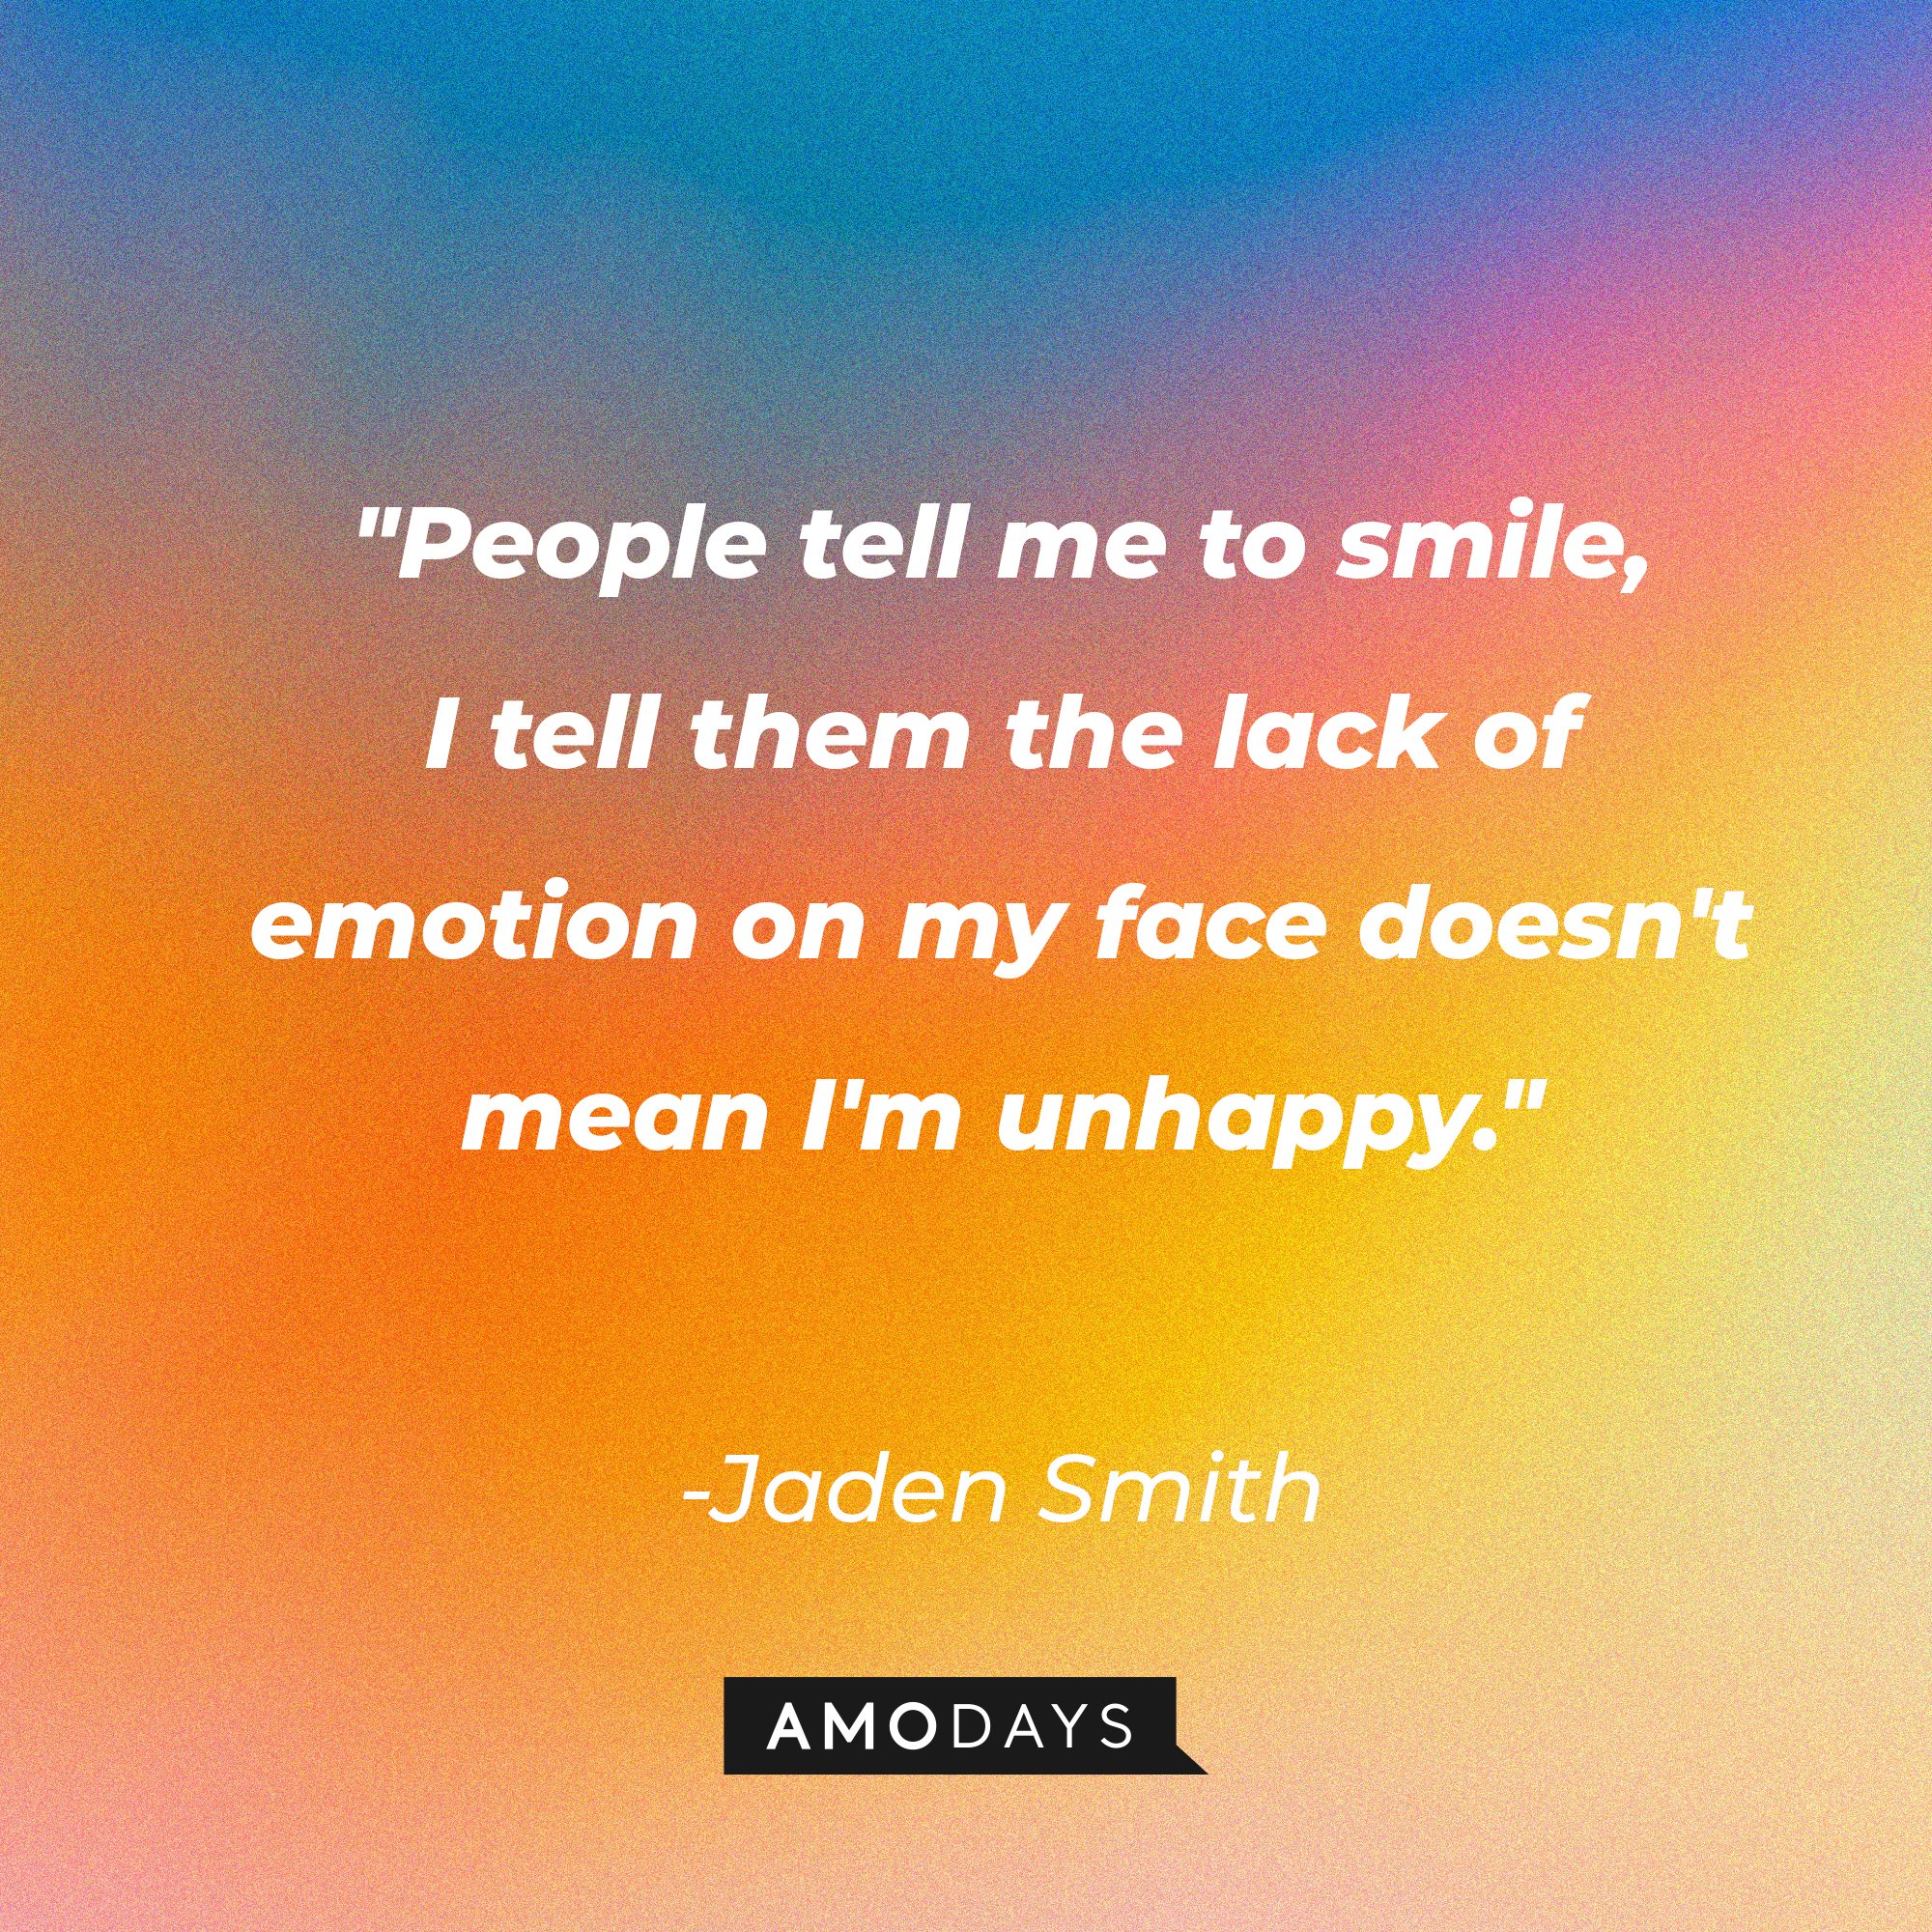 Jaden Smith's quote: "People tell me to smile, I tell them the lack of emotion on my face doesn't mean I'm unhappy." | Image: AmoDays